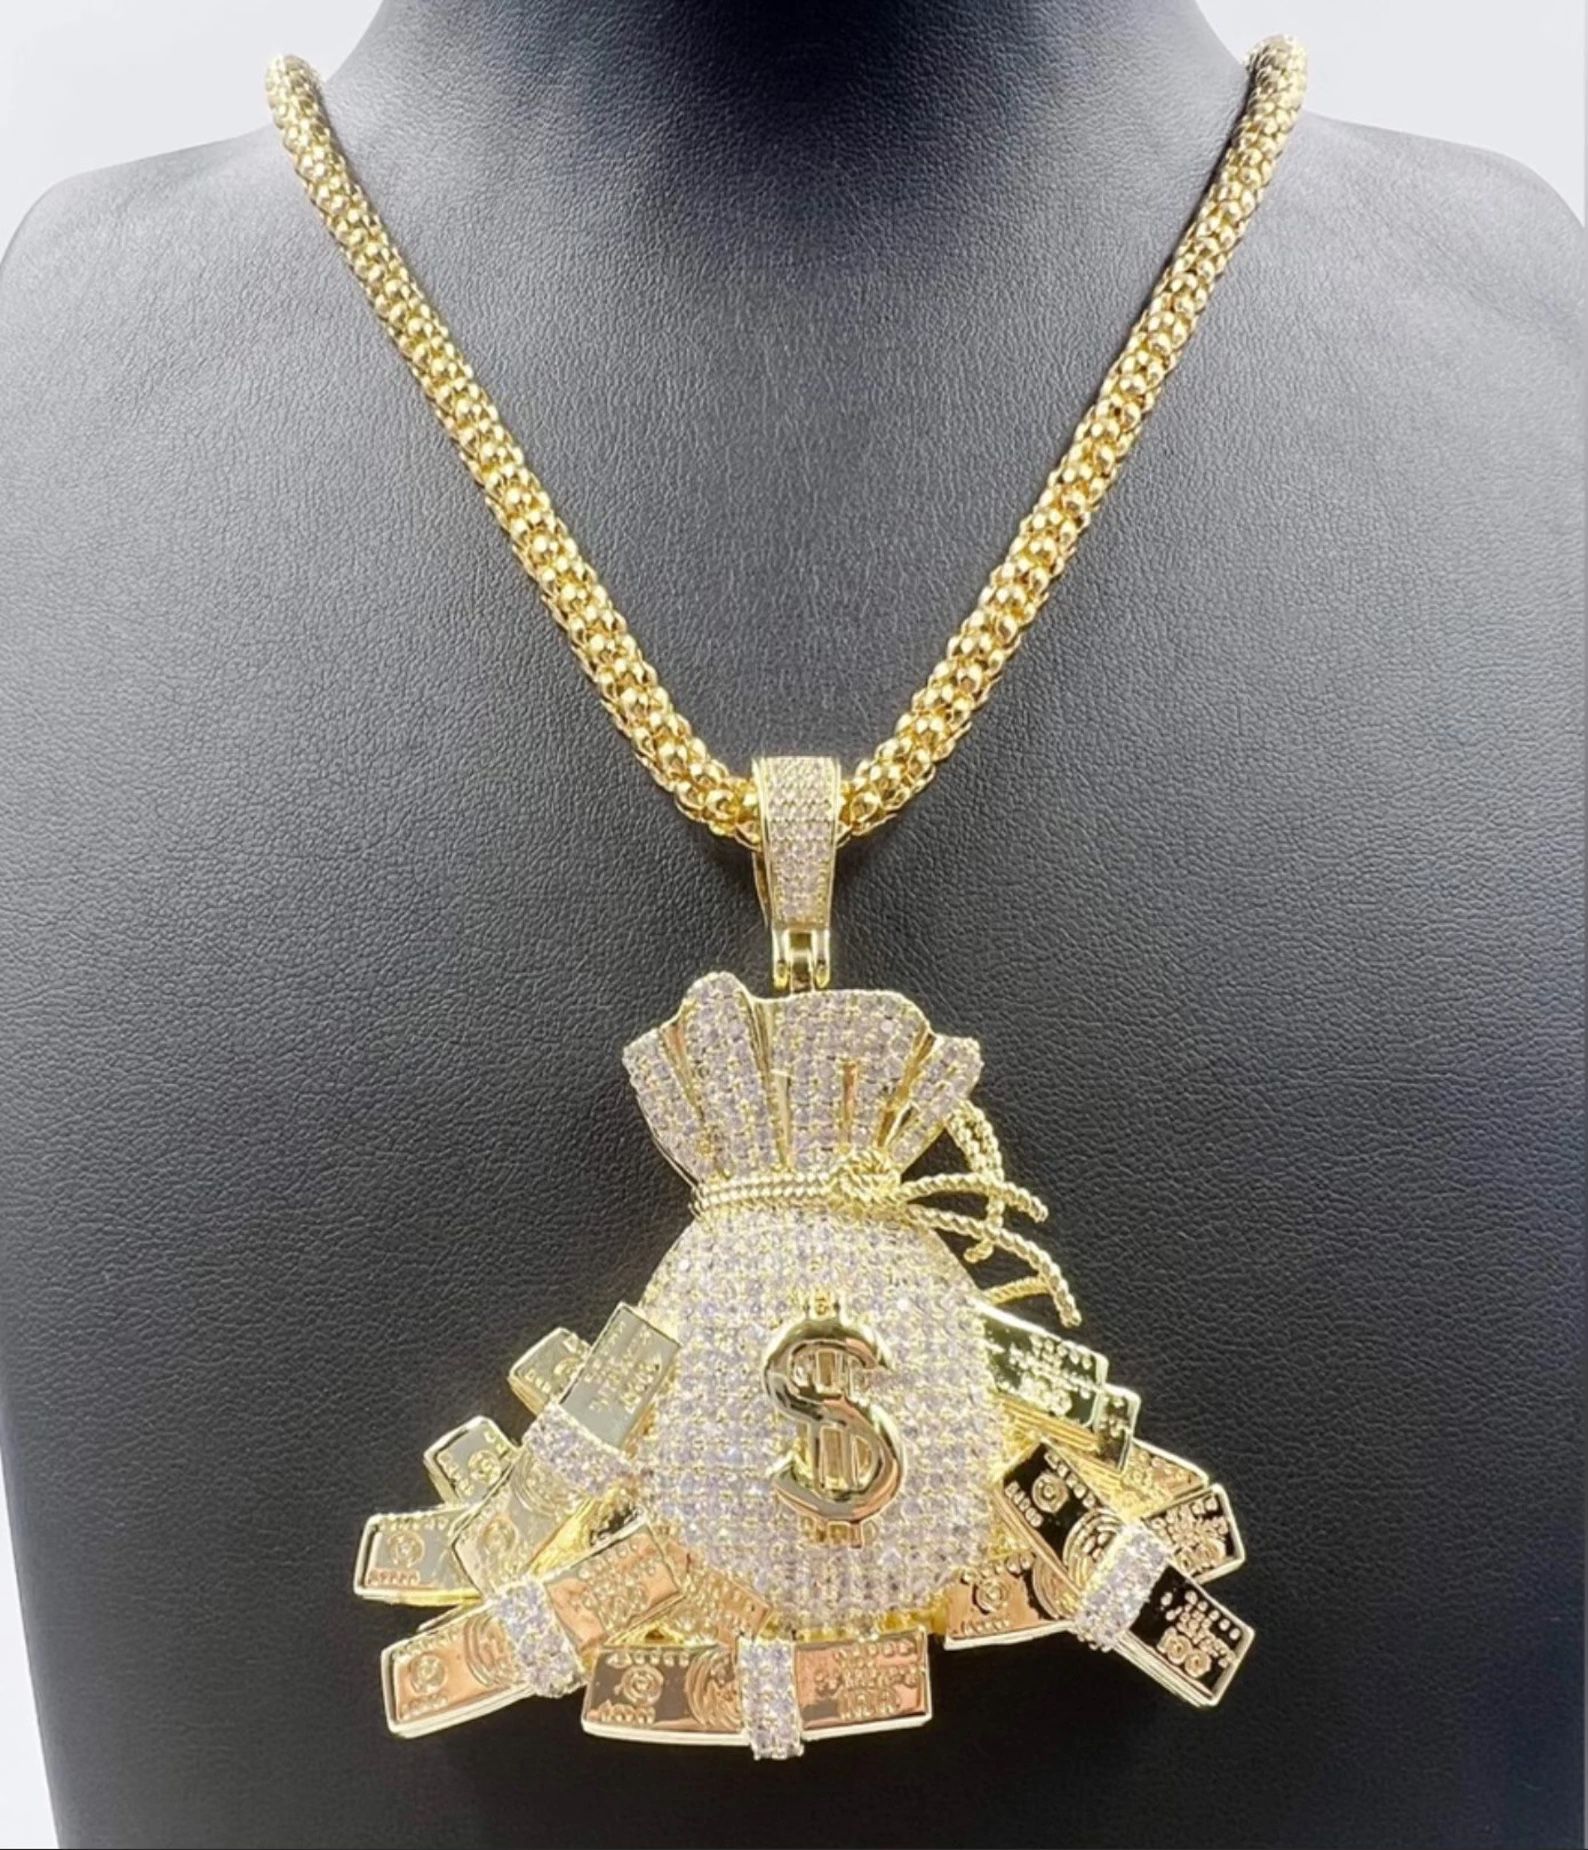 ✅4.50Ct Hip Hop Round Cut Cubic Zirconia Diamond Money Bag Pendant 14K Gold Plated and 24 Inch Chain✅🔥